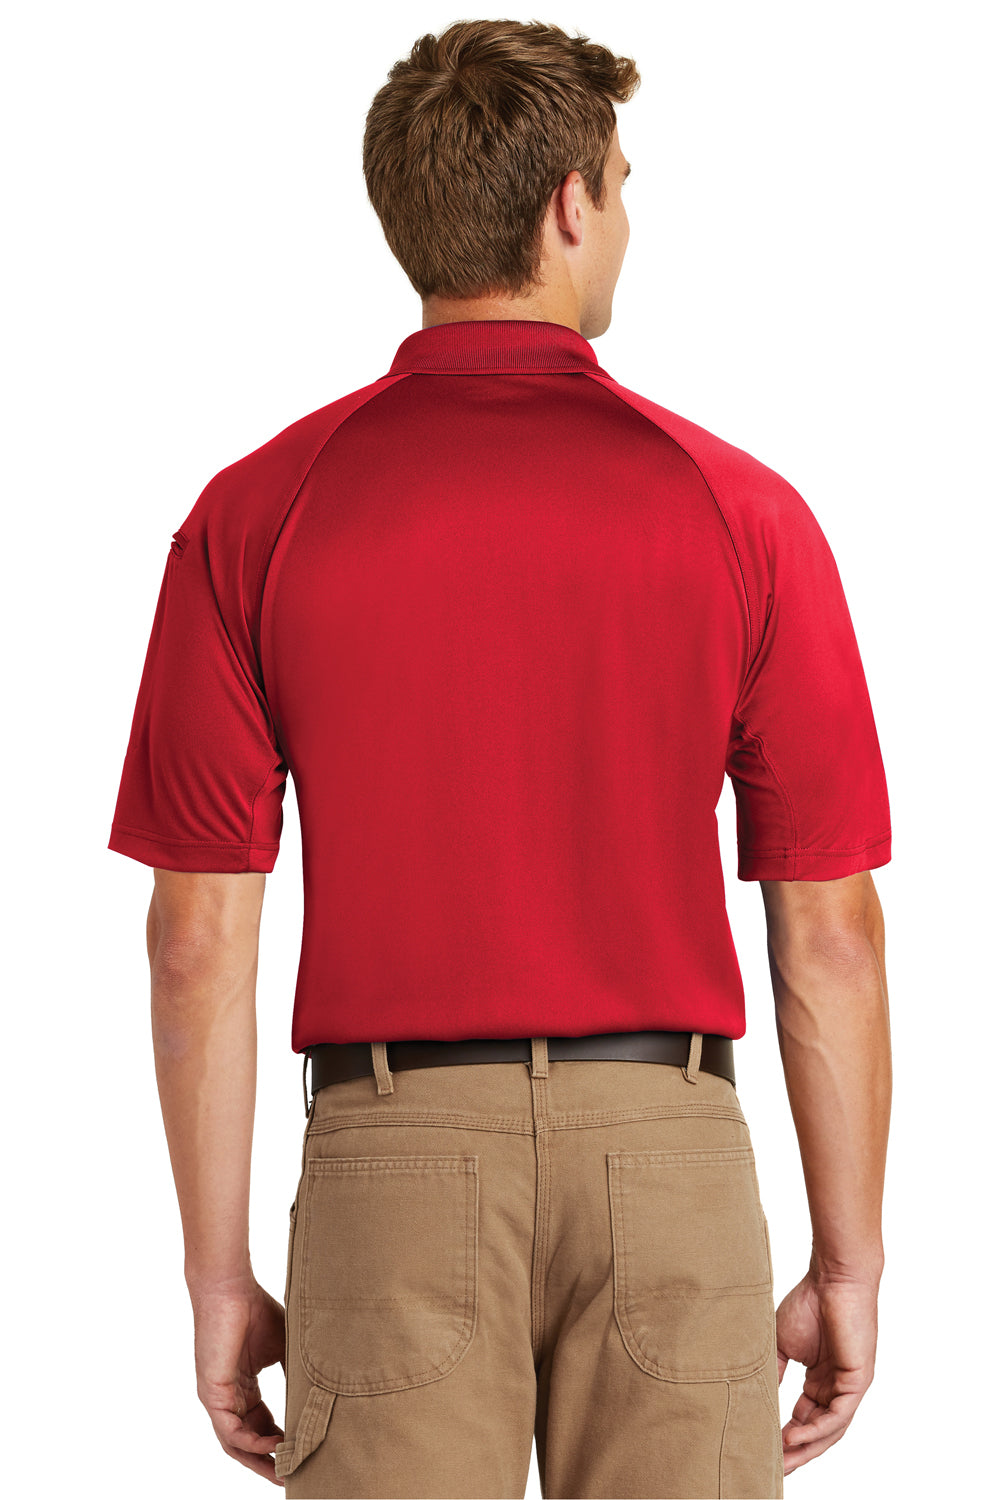 CornerStone CS410 Mens Select Tactical Moisture Wicking Short Sleeve Polo Shirt Red Back